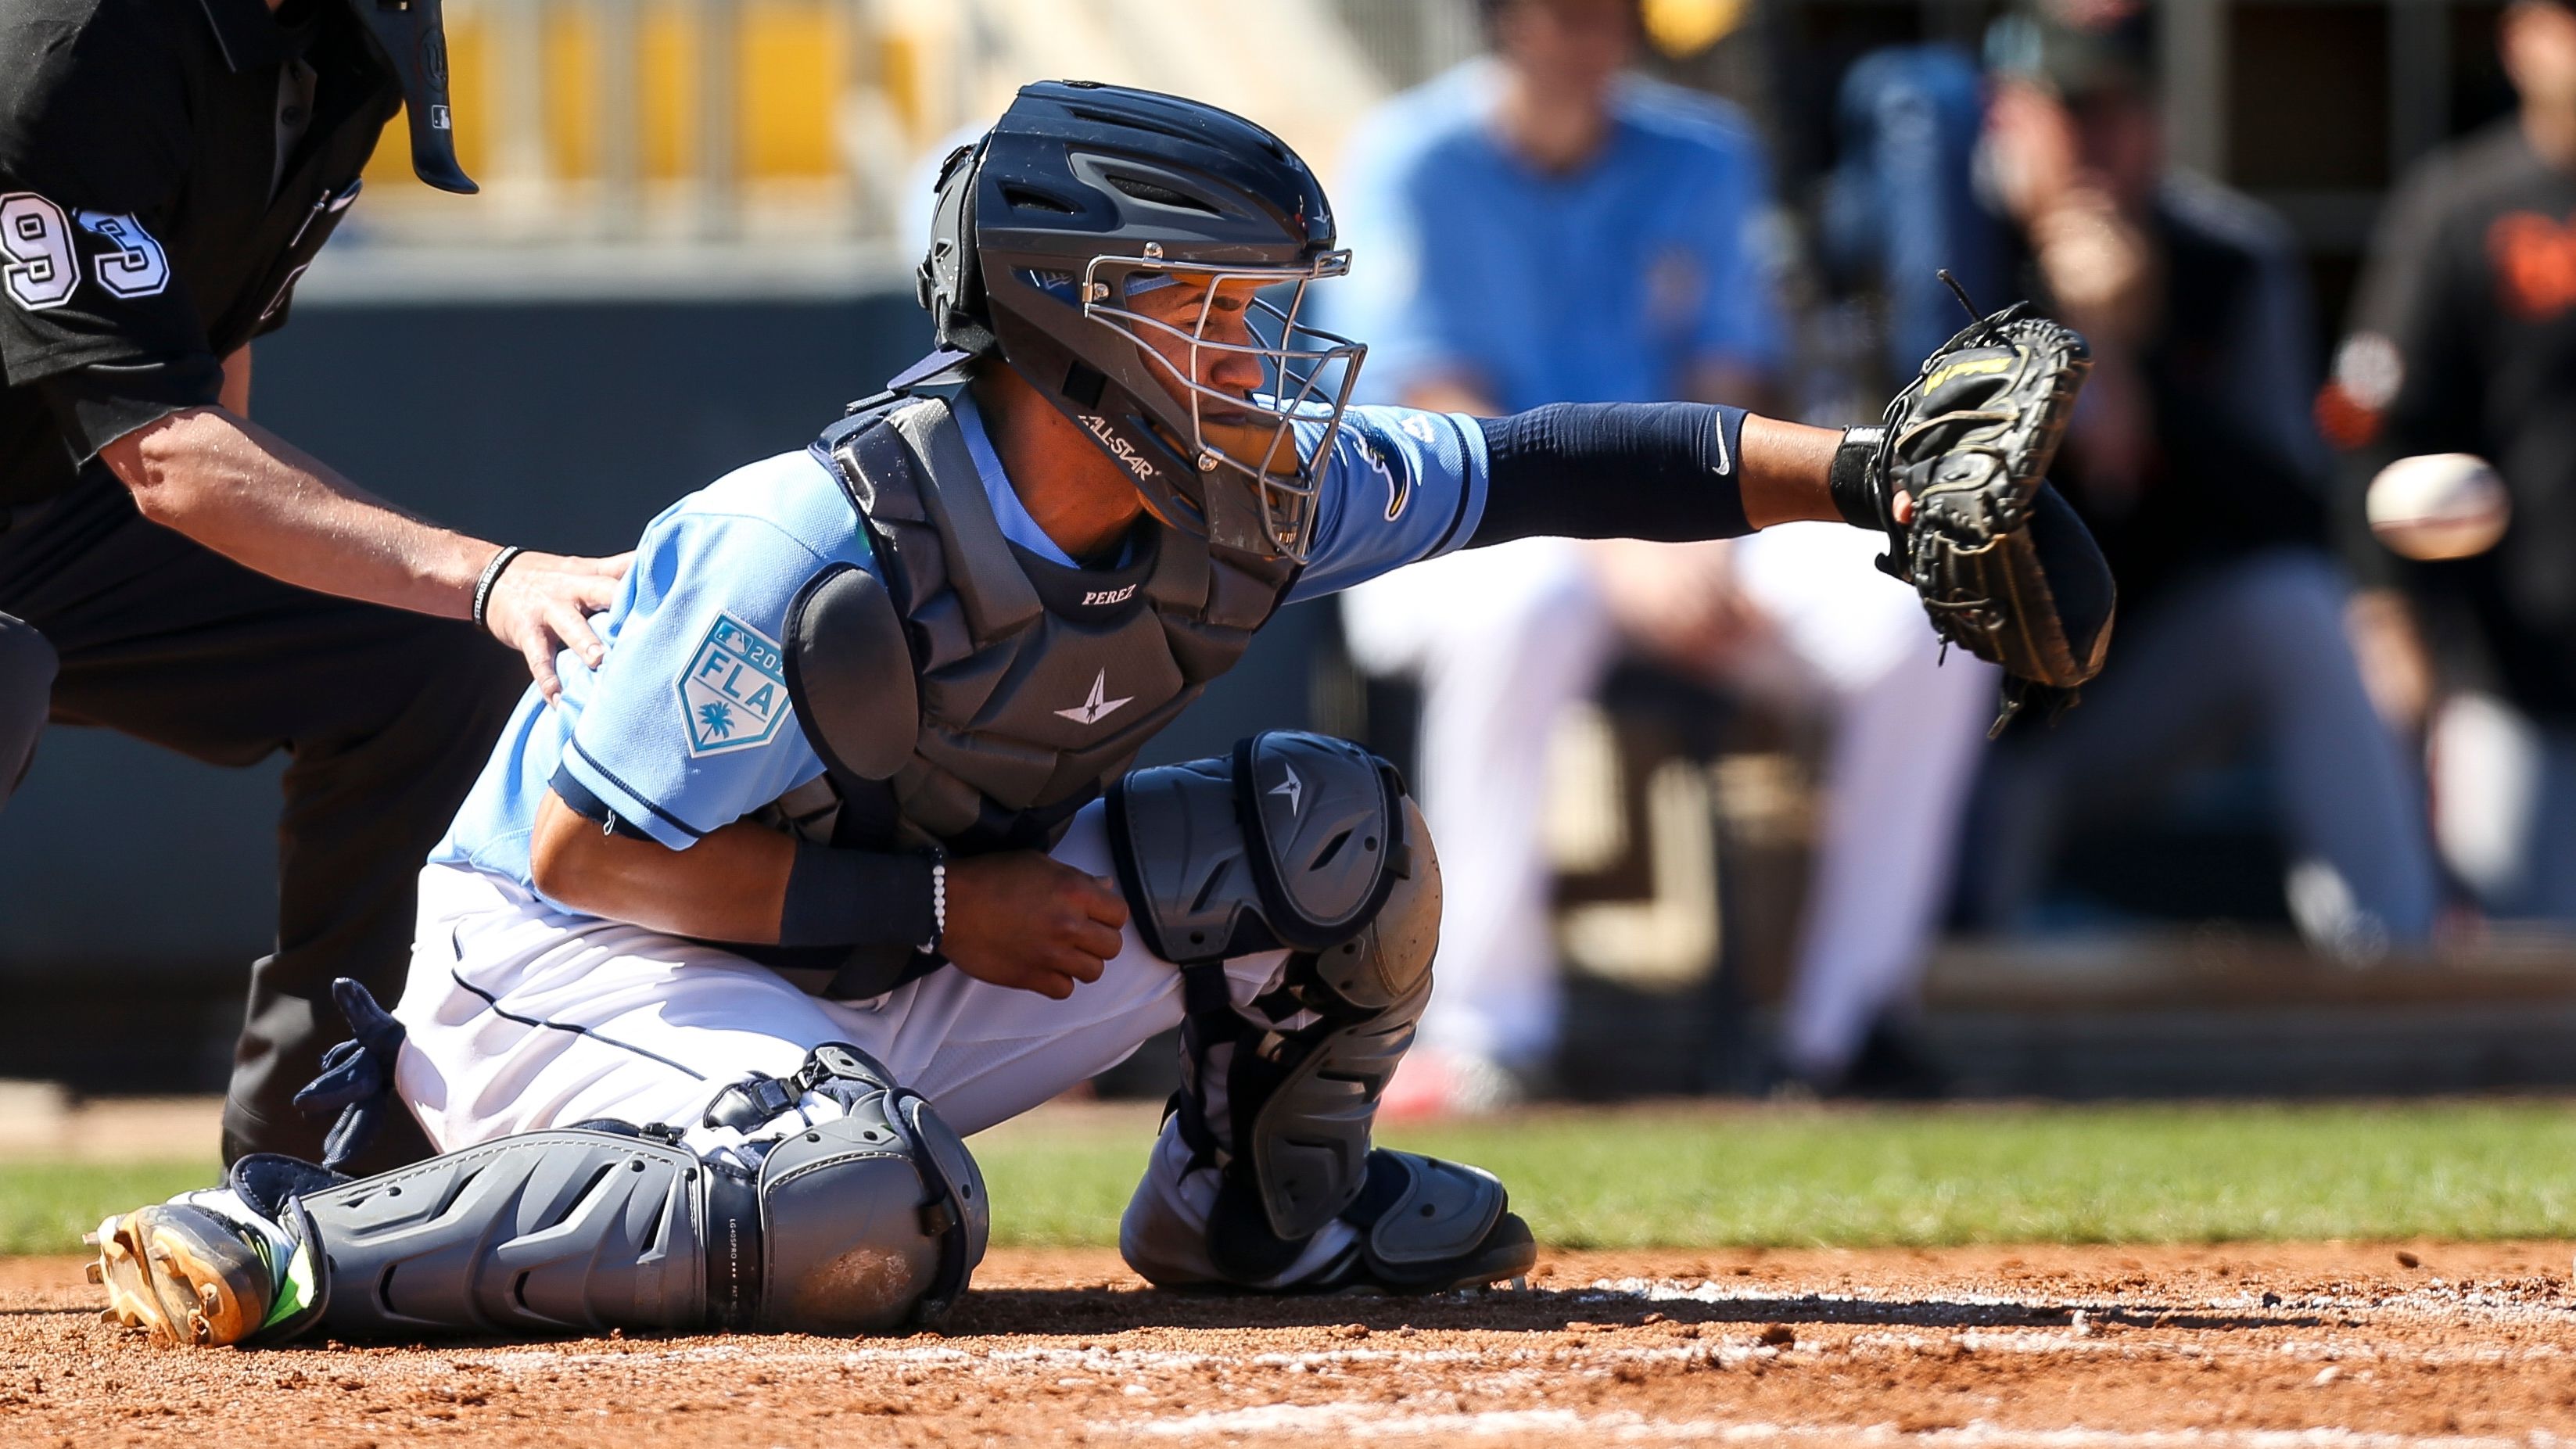 Rays lose first baseman Ji-Man Choi for season; trade candidate Nate Lowe  to get opportunity 